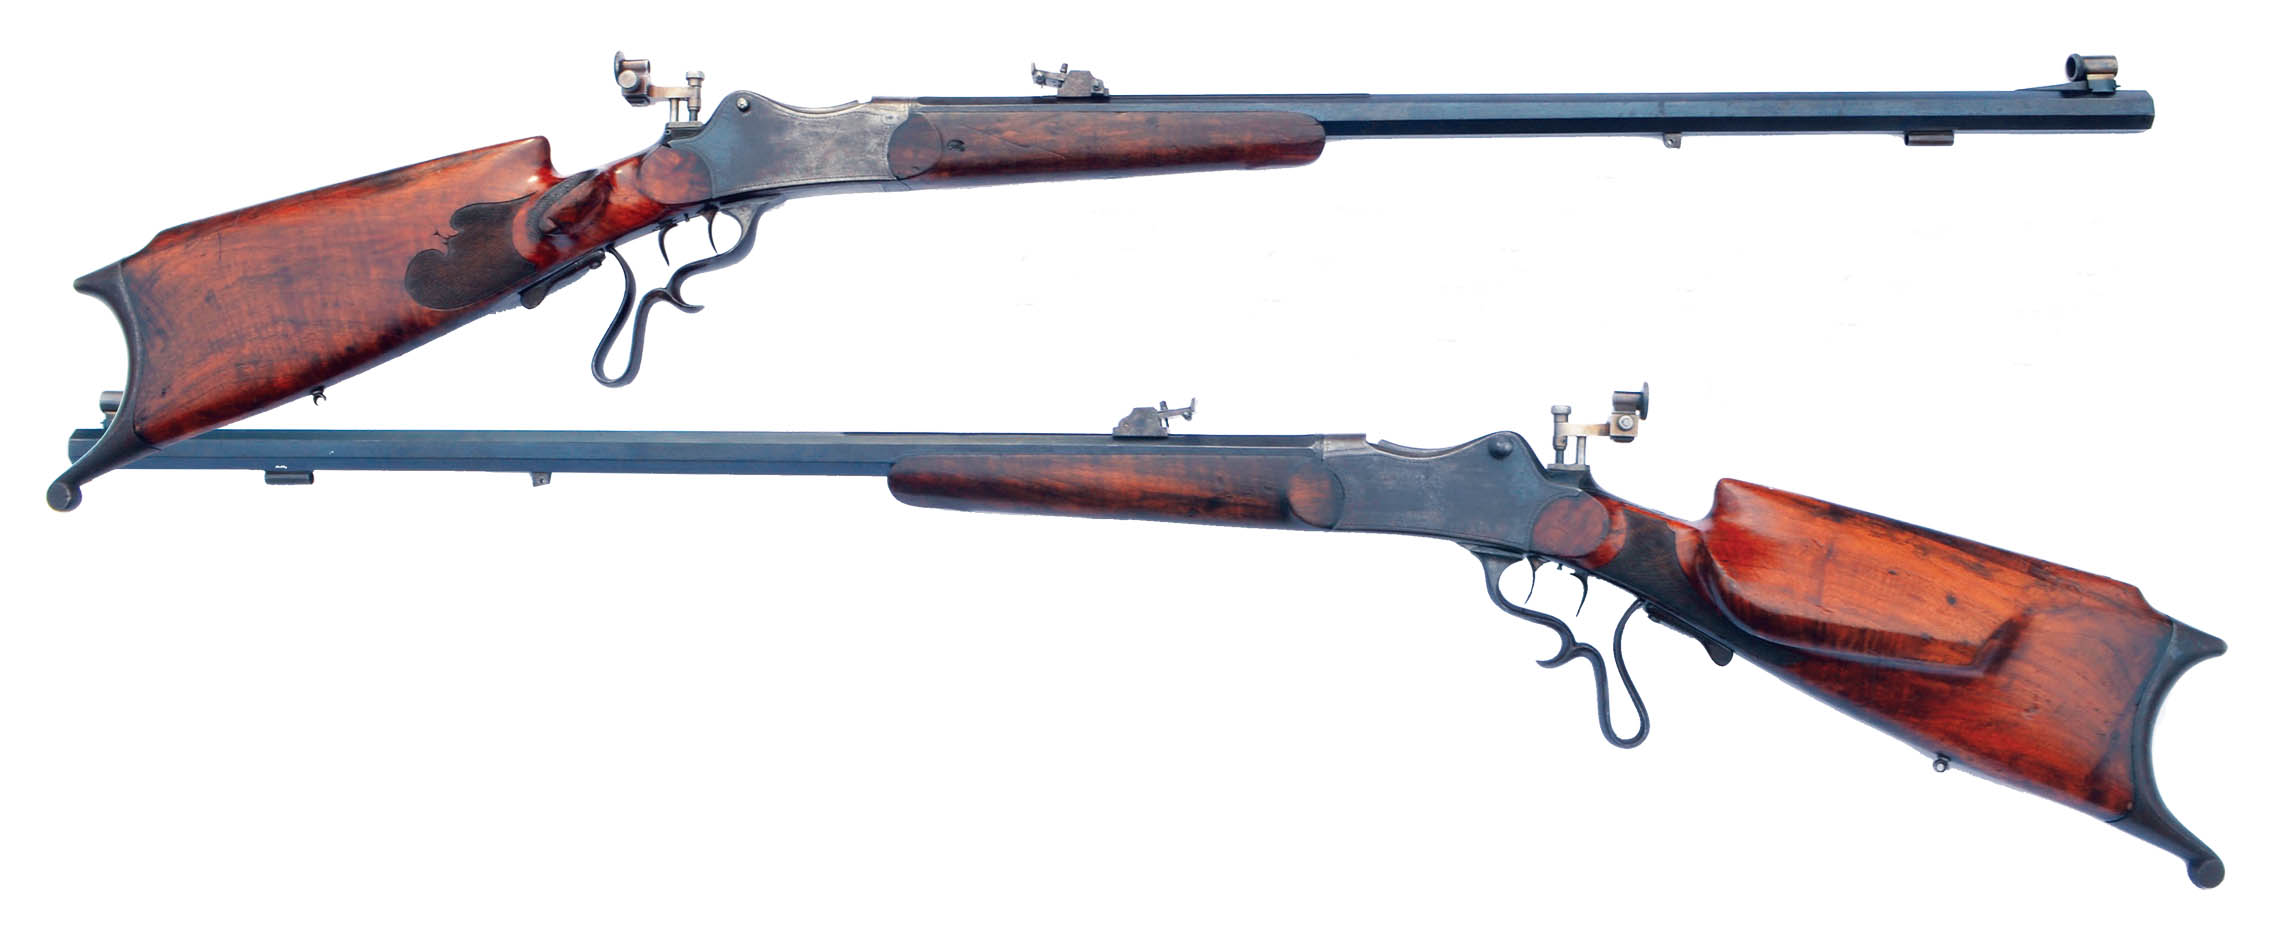 Probably made around 1880 based on a Martini action, the rifle has a Swiss-style stock, can be dismantled without tools (breechblock and trigger assembly) and is (or was) chambered for an 11.15mm cartridge.